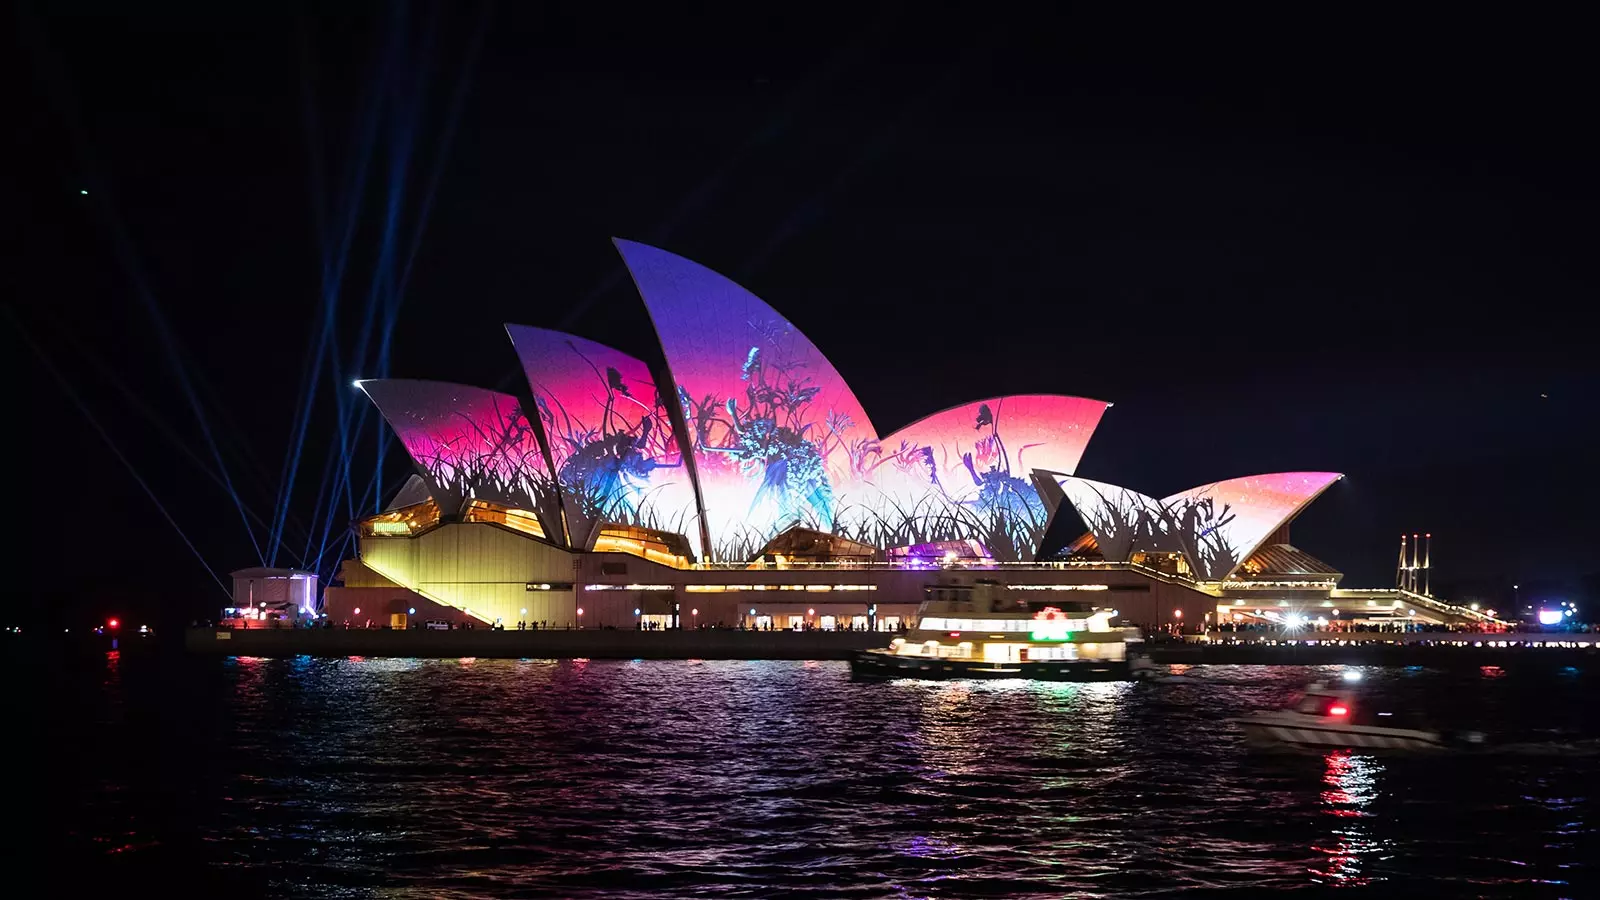 The Sydney Opera House with a light display projected on it.